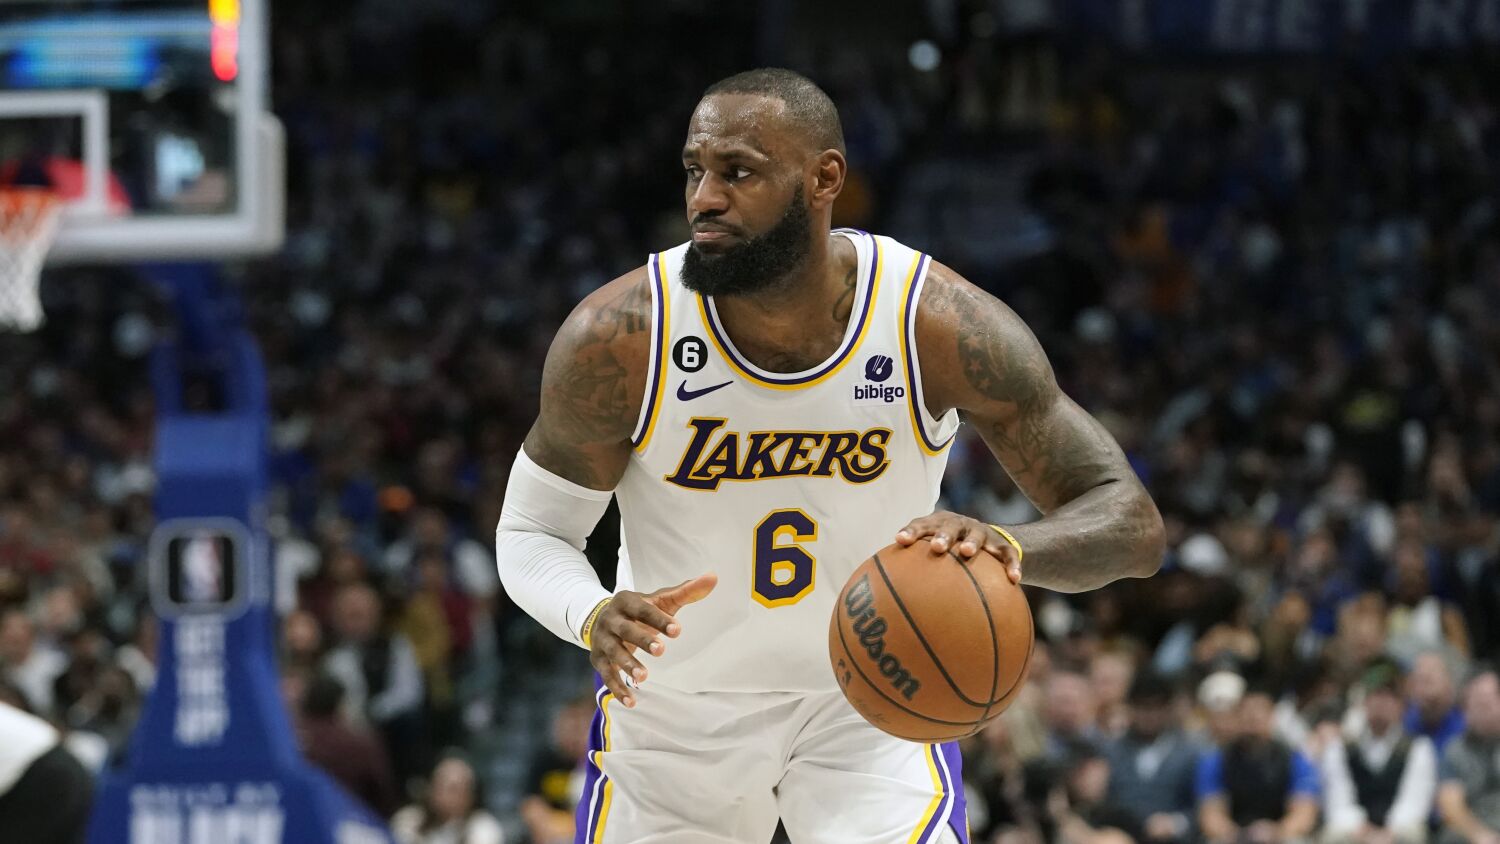 Lakers star LeBron James will play Sunday against the Bulls